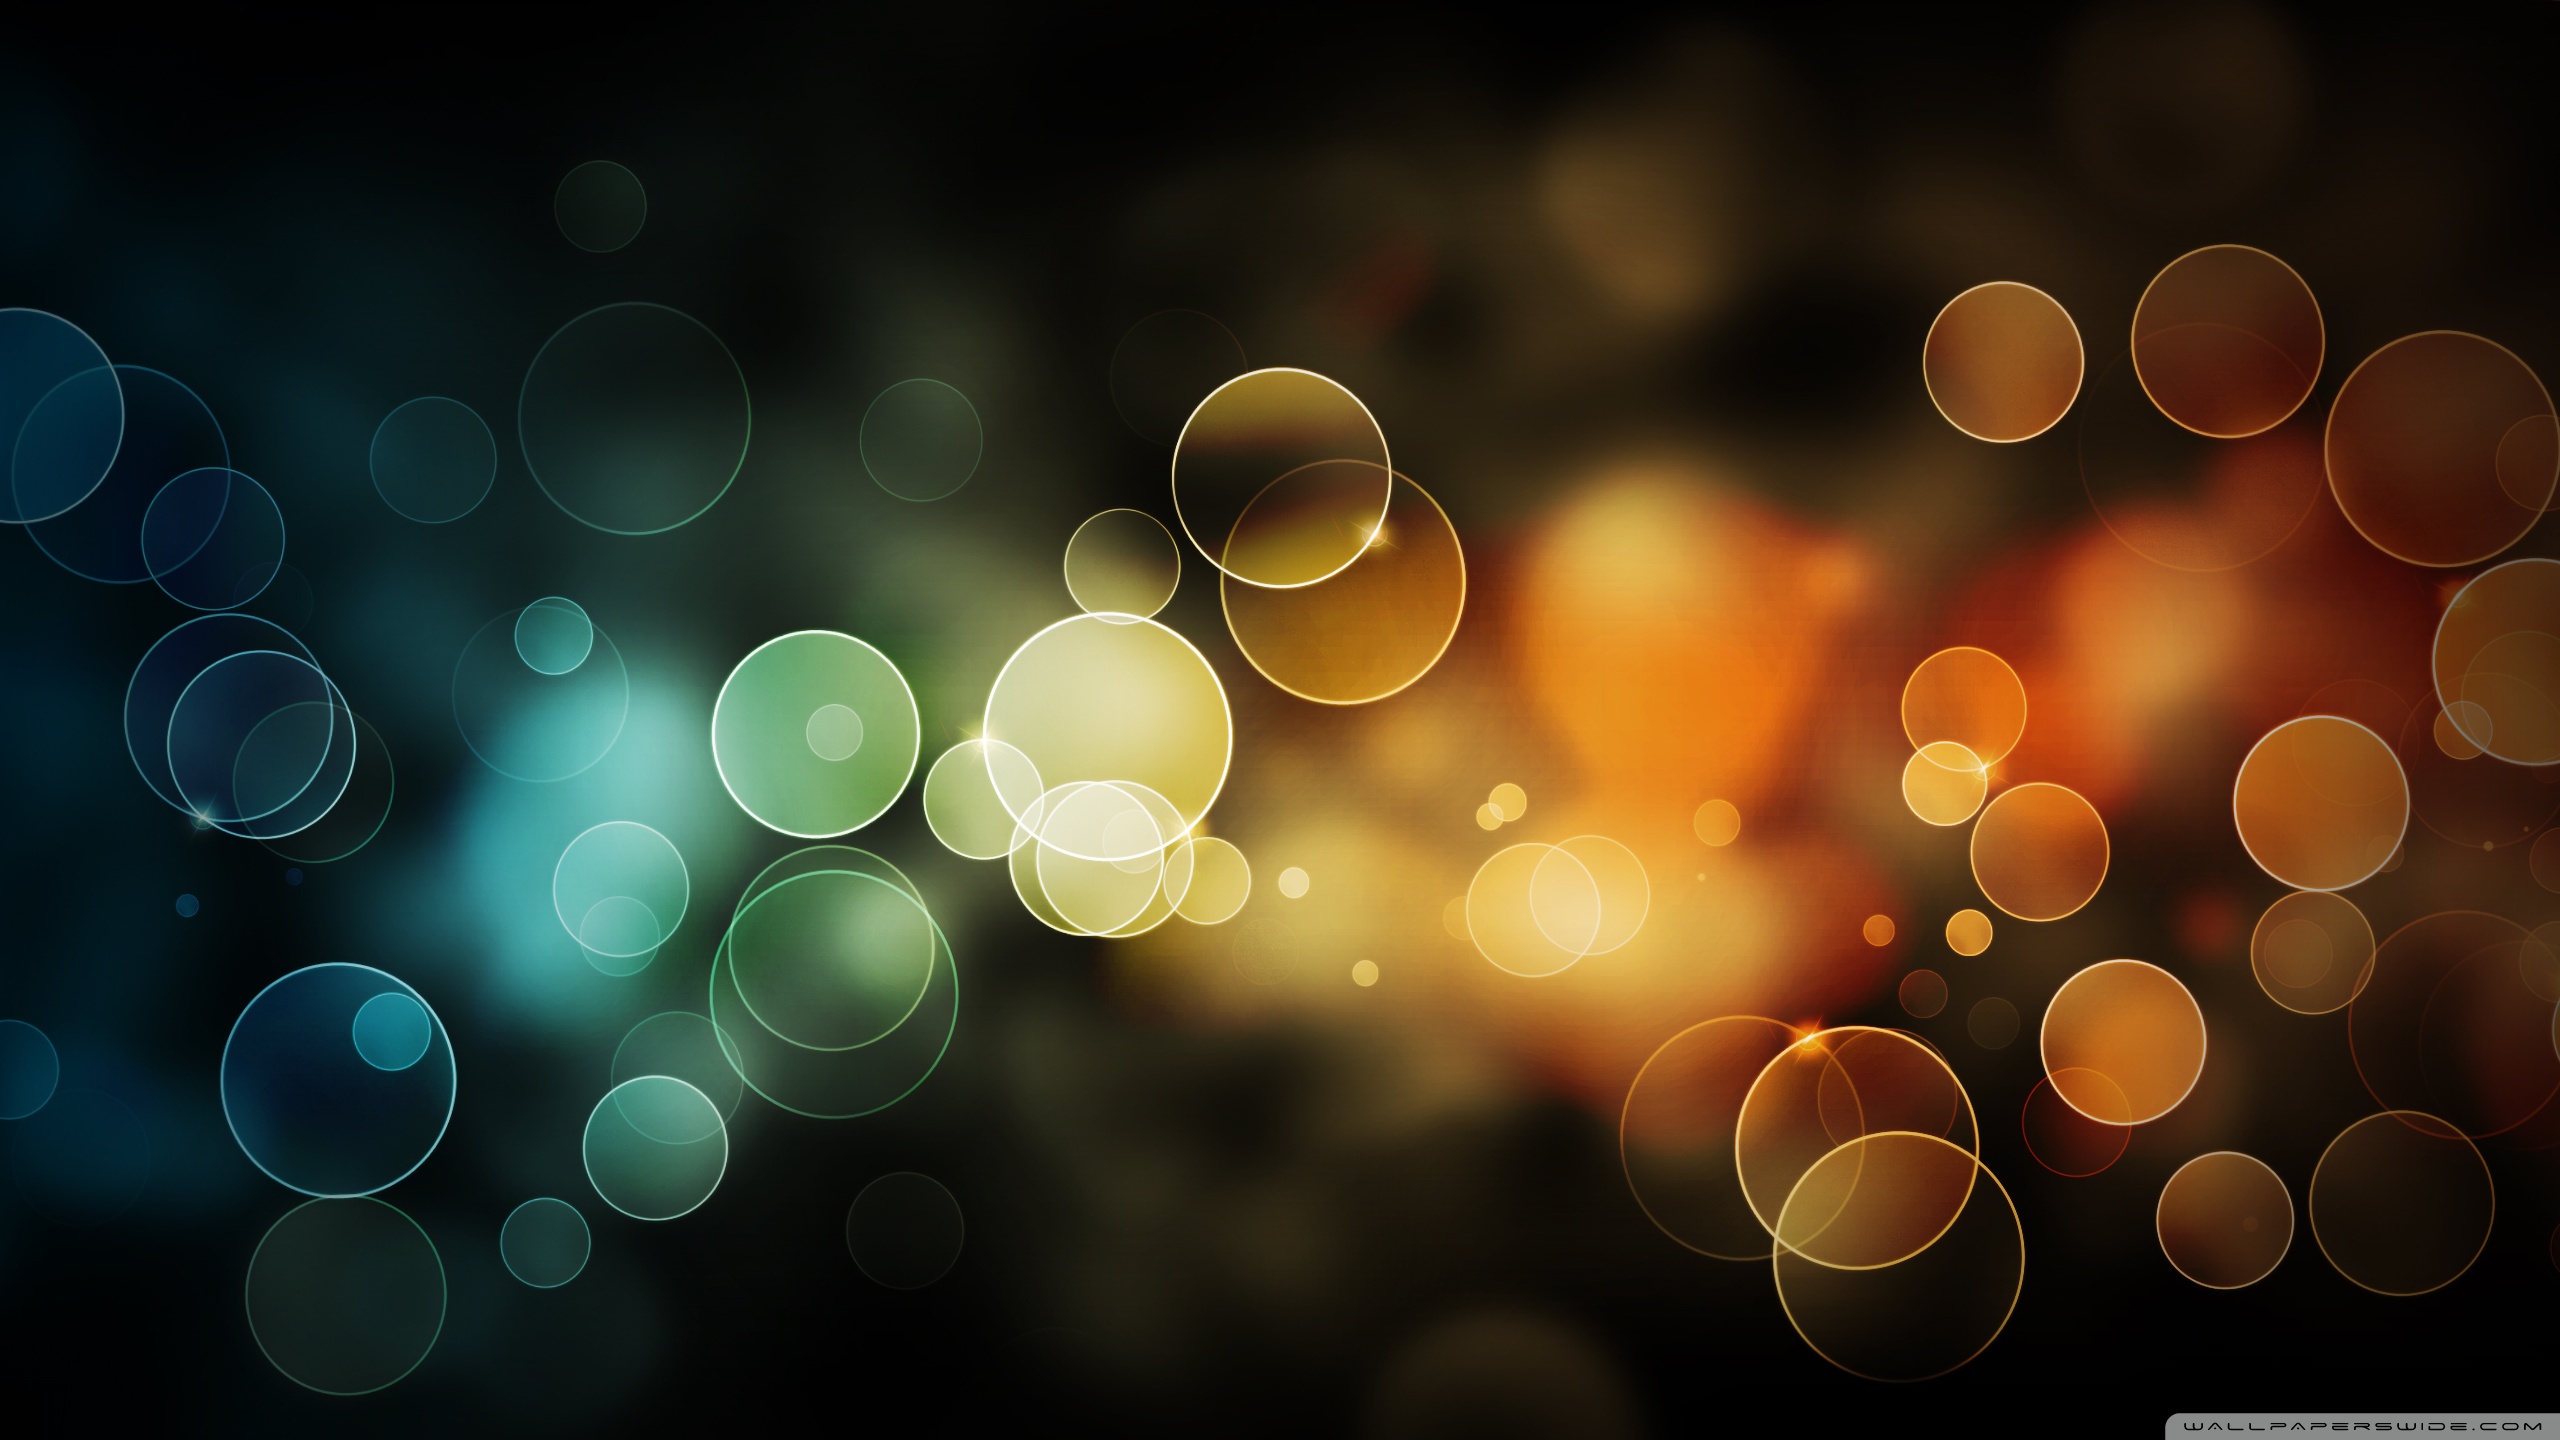 abstract_background_brown_and_blue_circles-wallpaper-2560x1440.jpg